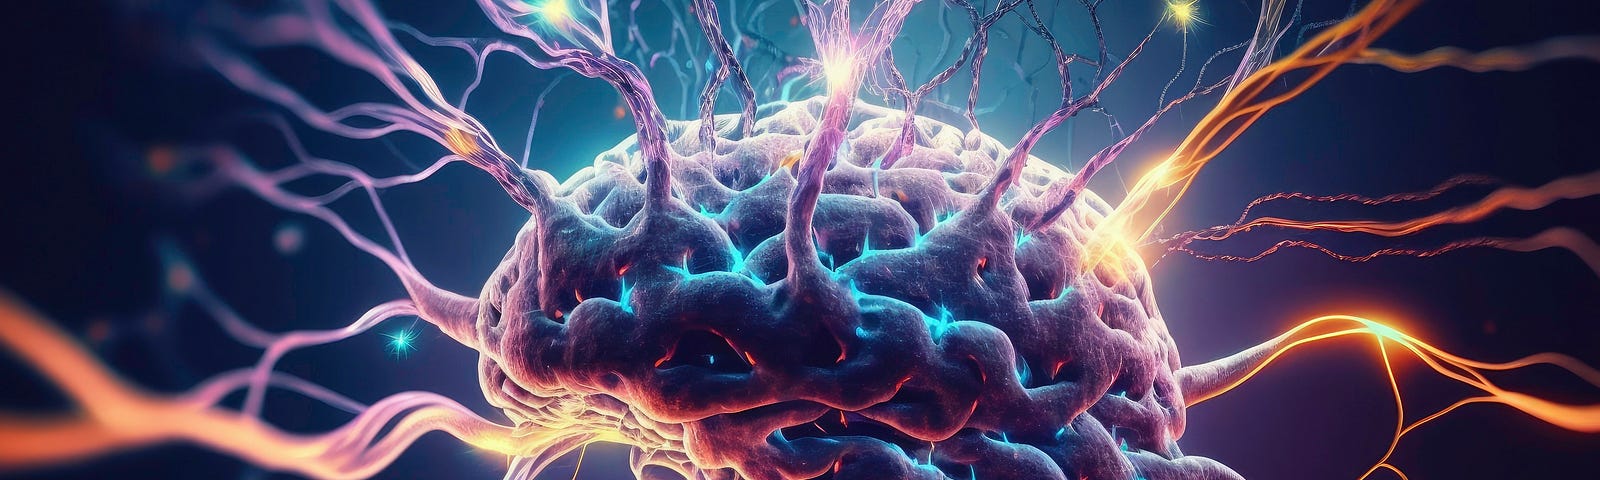 A illustration of a human brain, with electrified limb-like tendrils emerging from it.